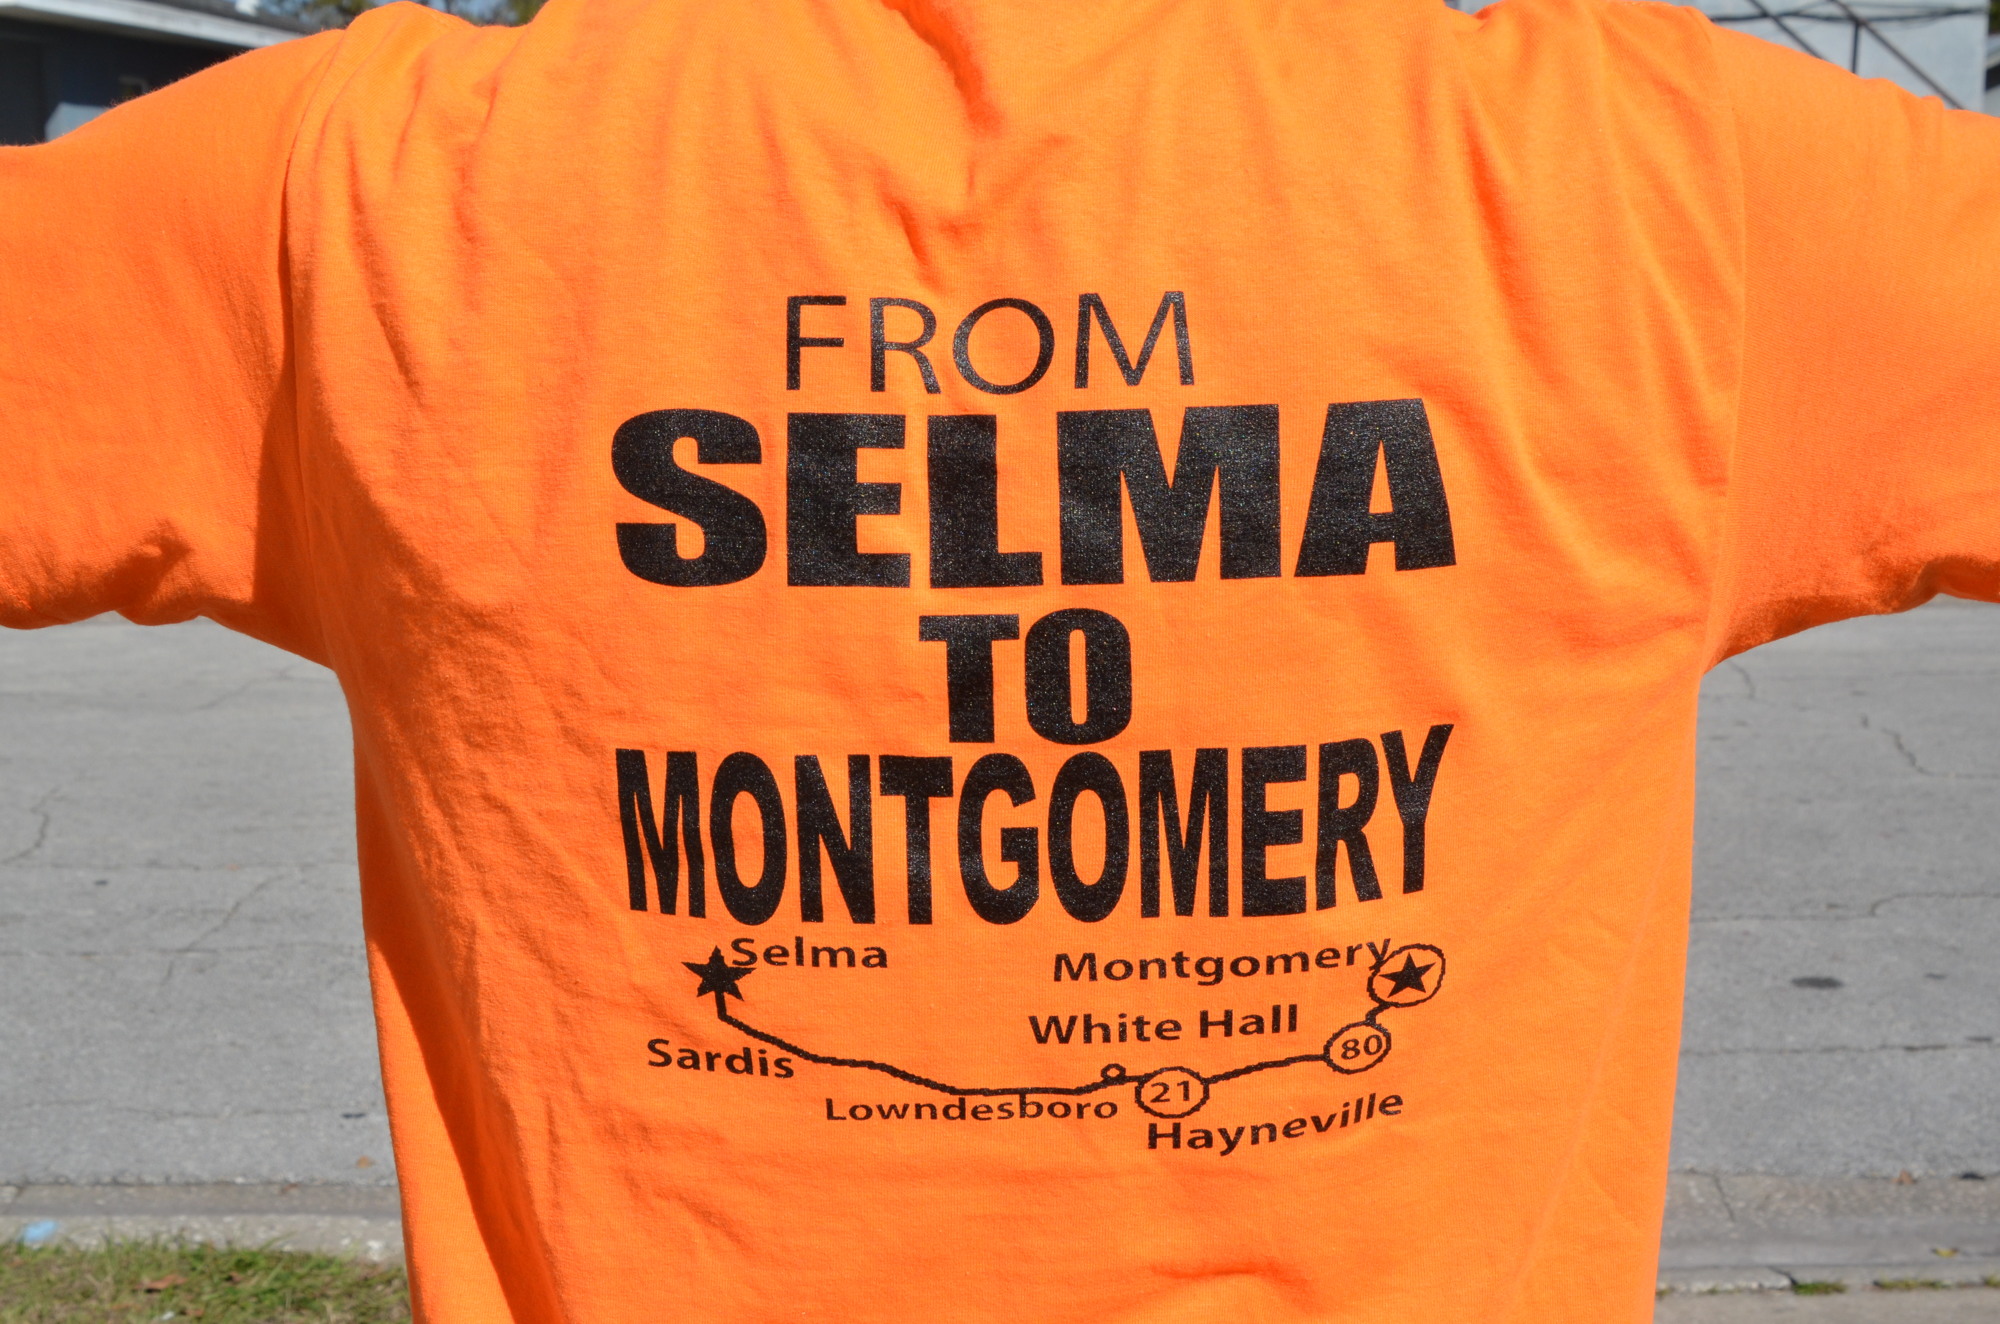 The route Anthony Hodge will take on his 54-mile walk is mapped out on the back of his T-shirt.